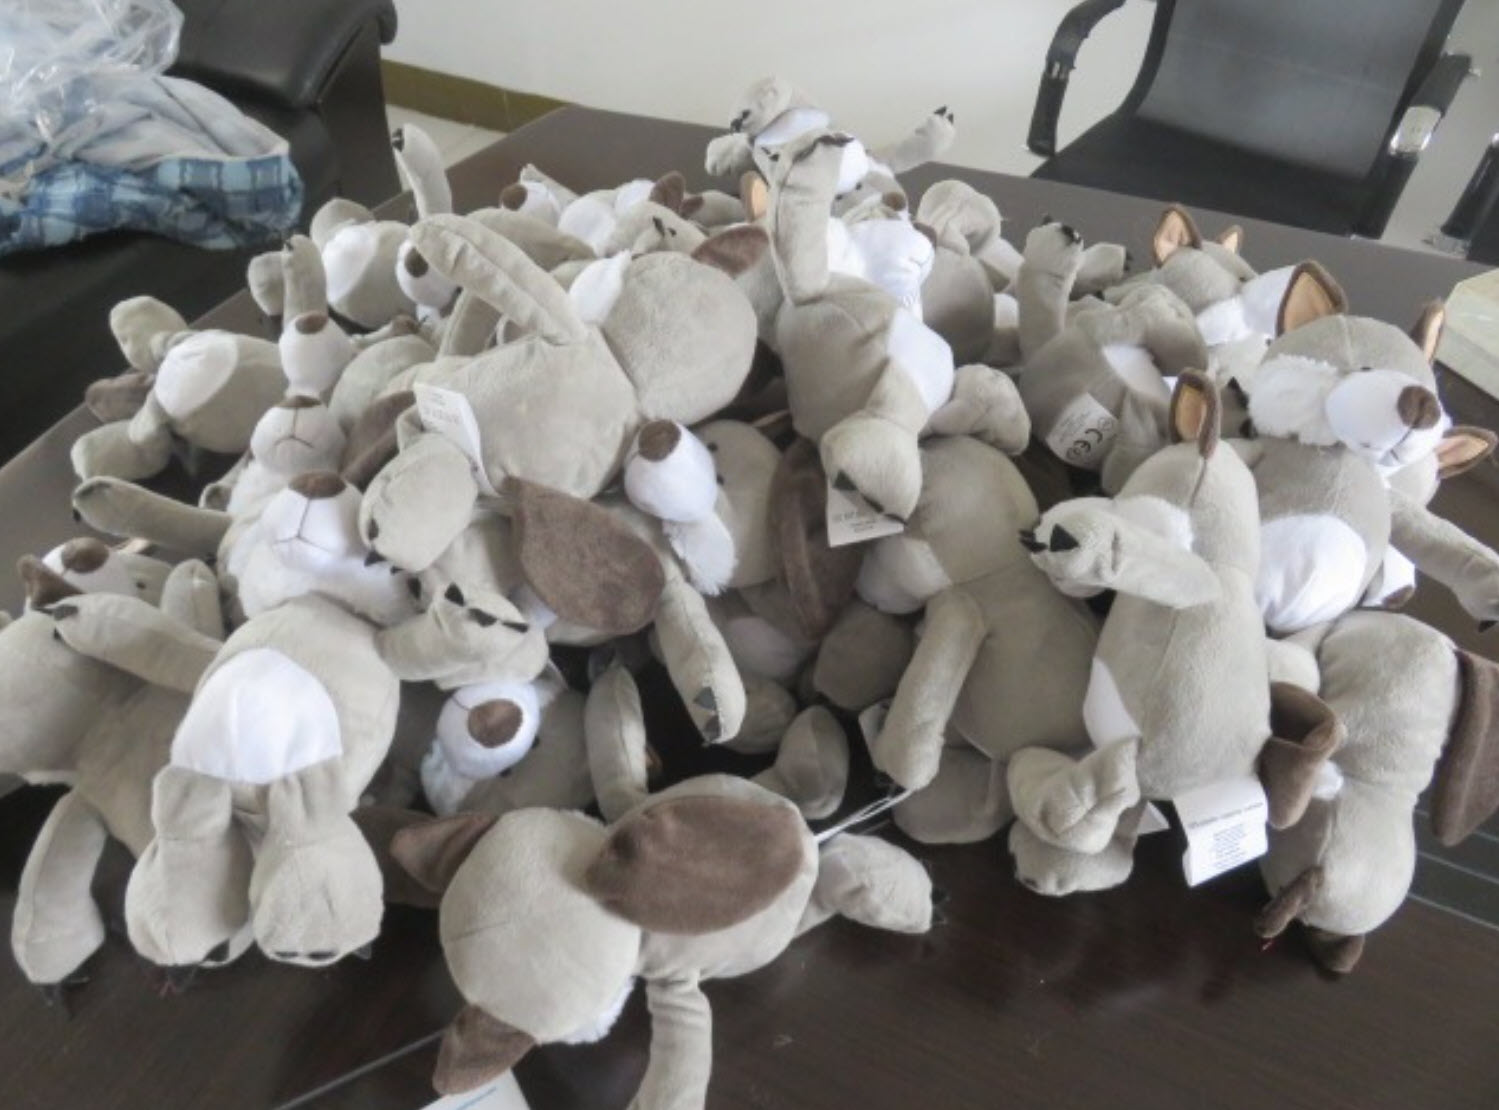 Common onsite tests for Plush toys